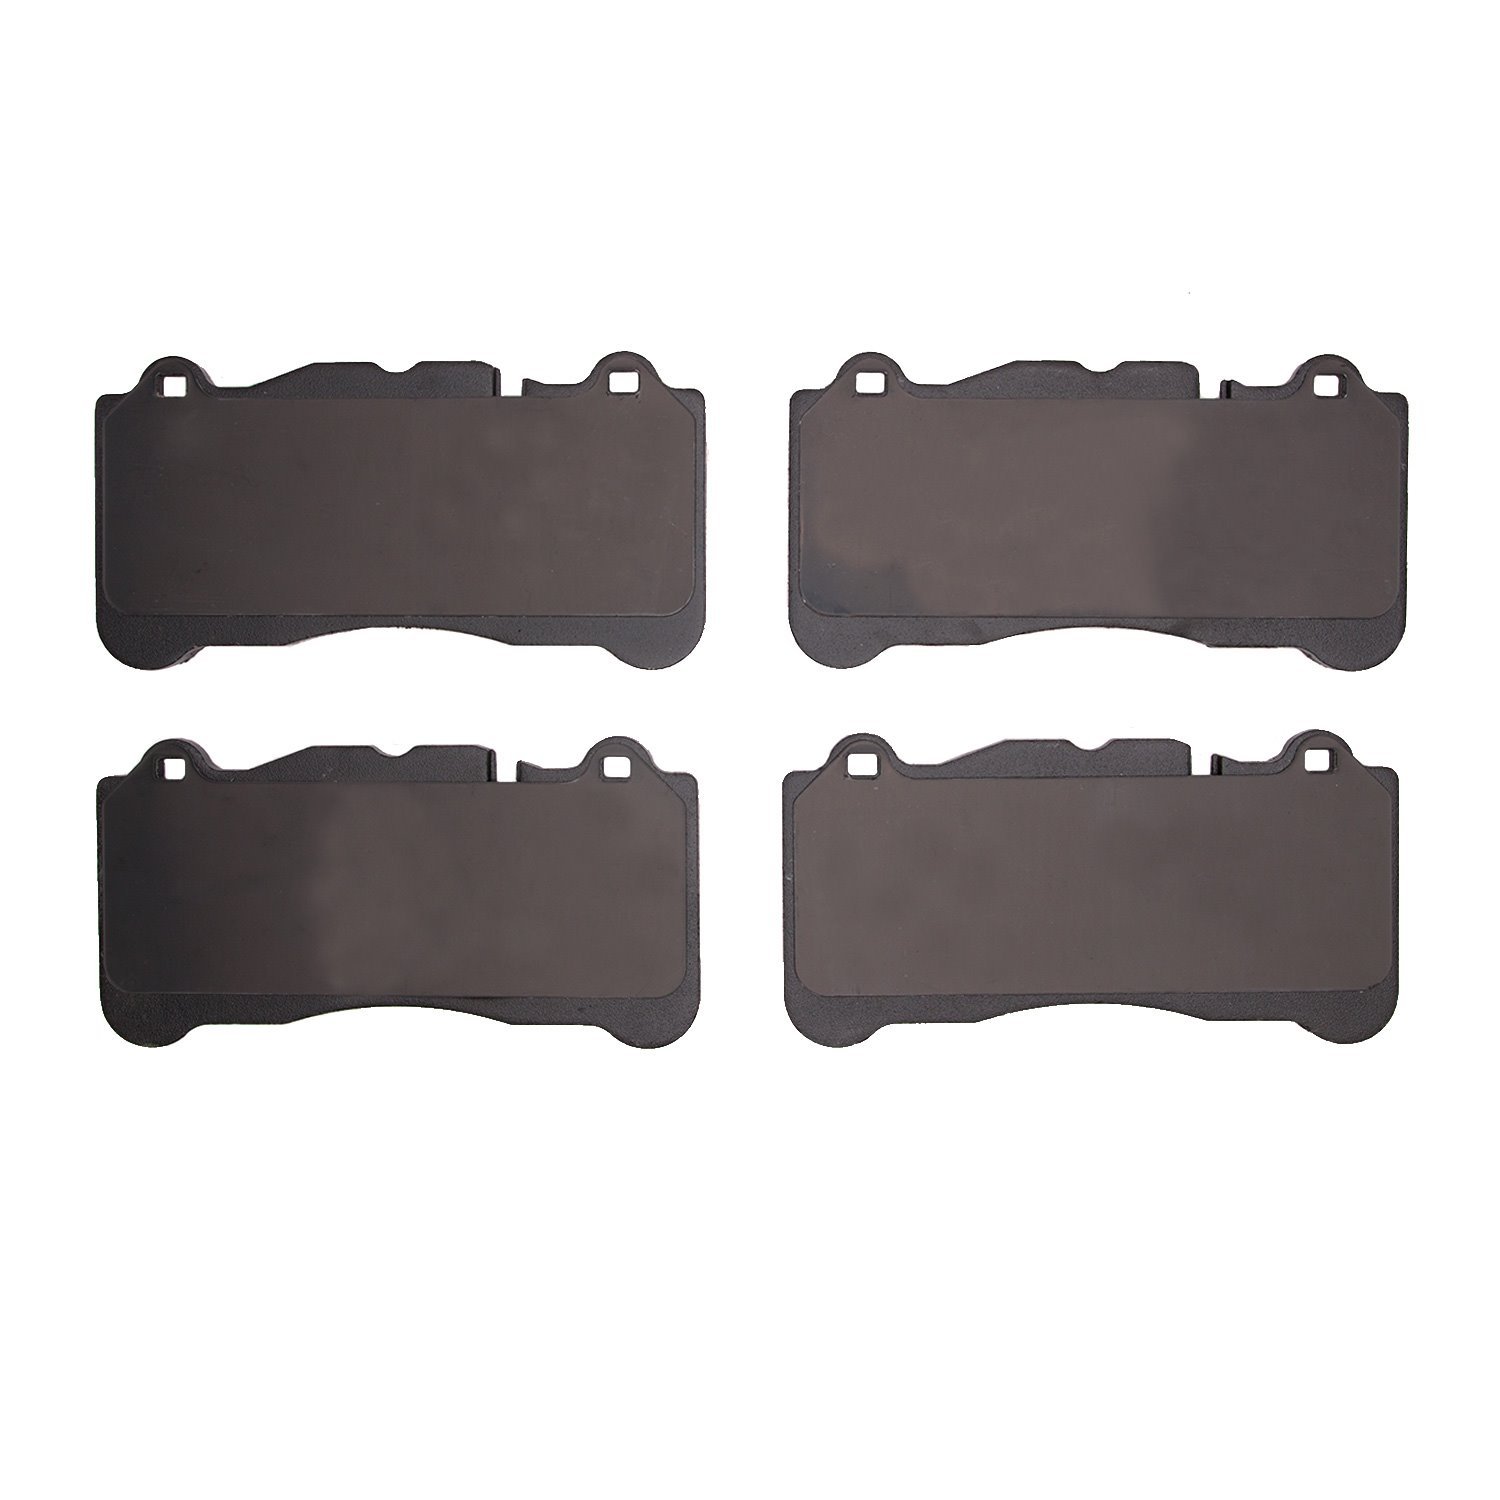 1311-1944-00 3000-Series Semi-Metallic Brake Pads, Fits Select Multiple Makes/Models, Position: Front